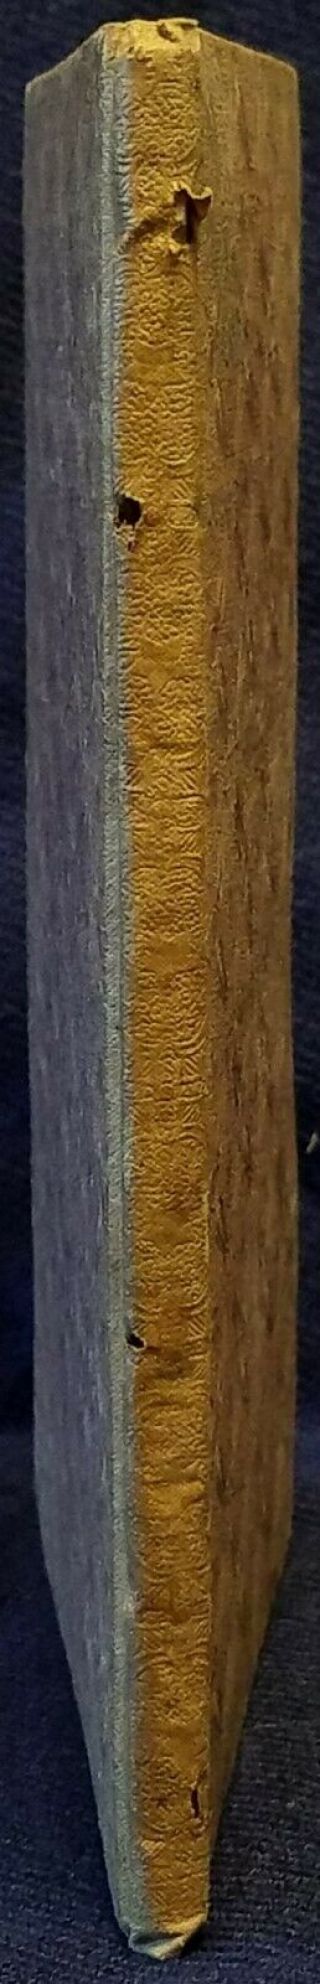 William Ellery Channing Self - Culture 1839 HC 1st ed Good cond 3